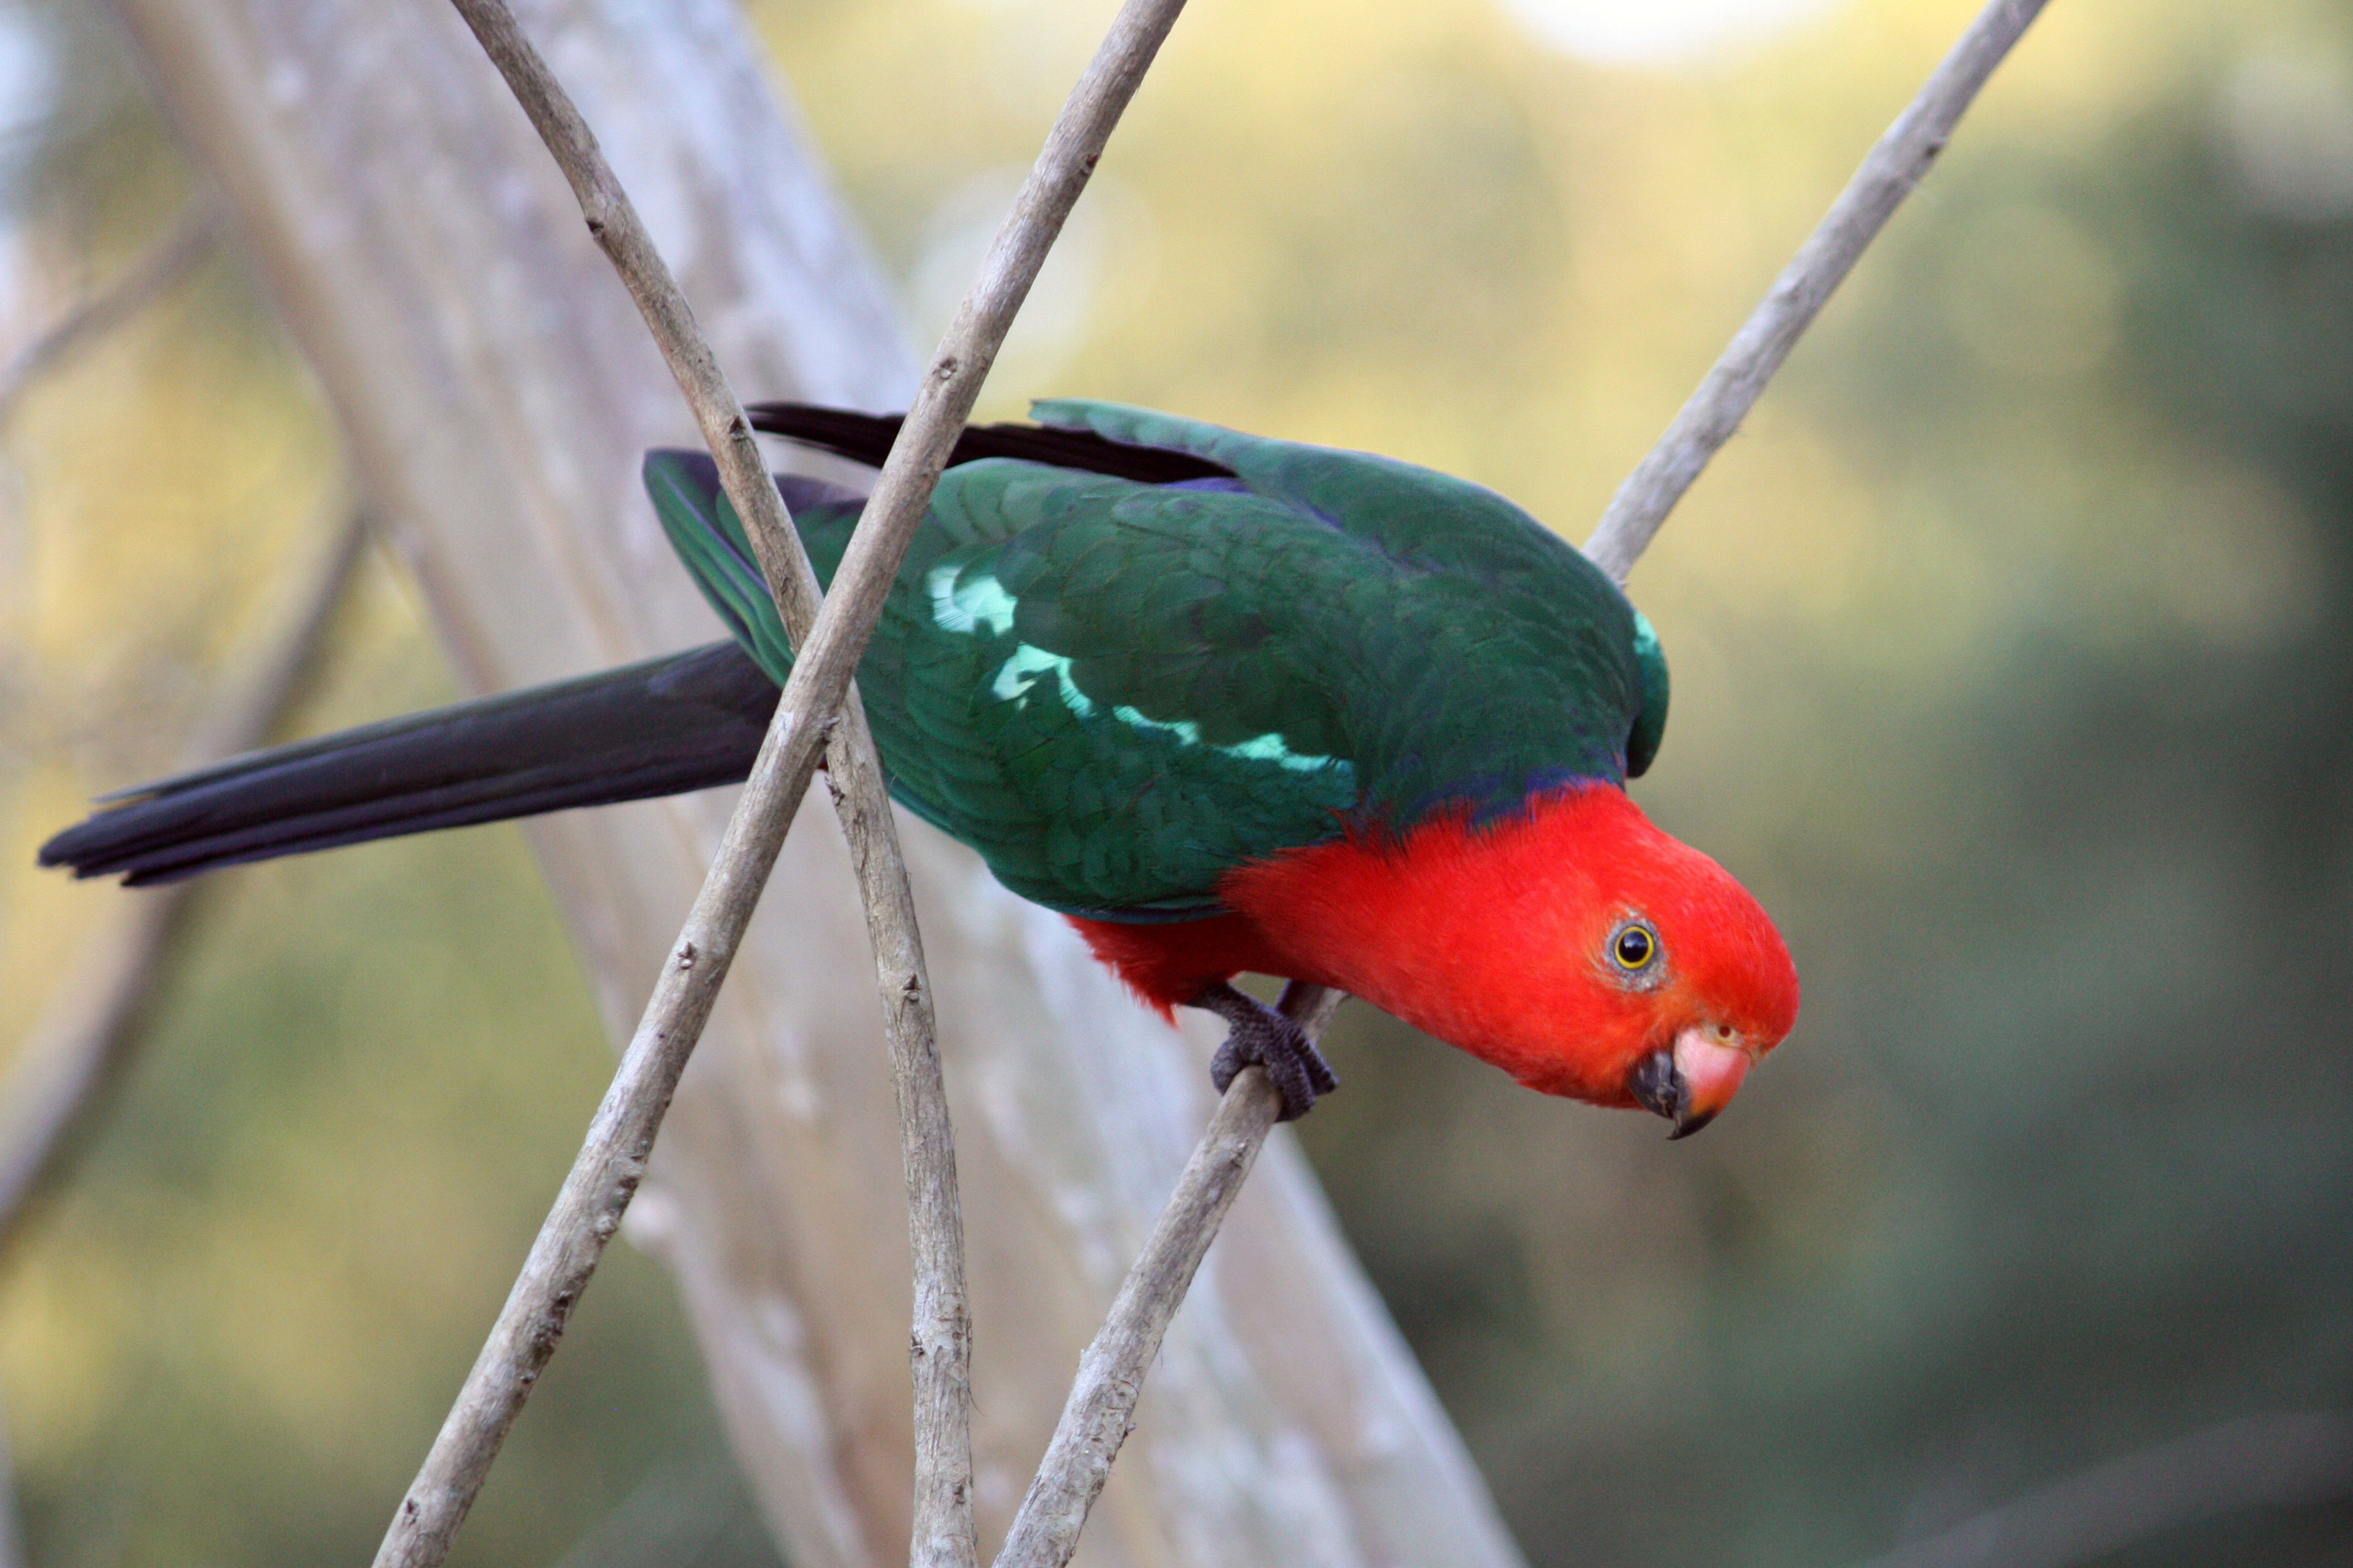 green and red bird